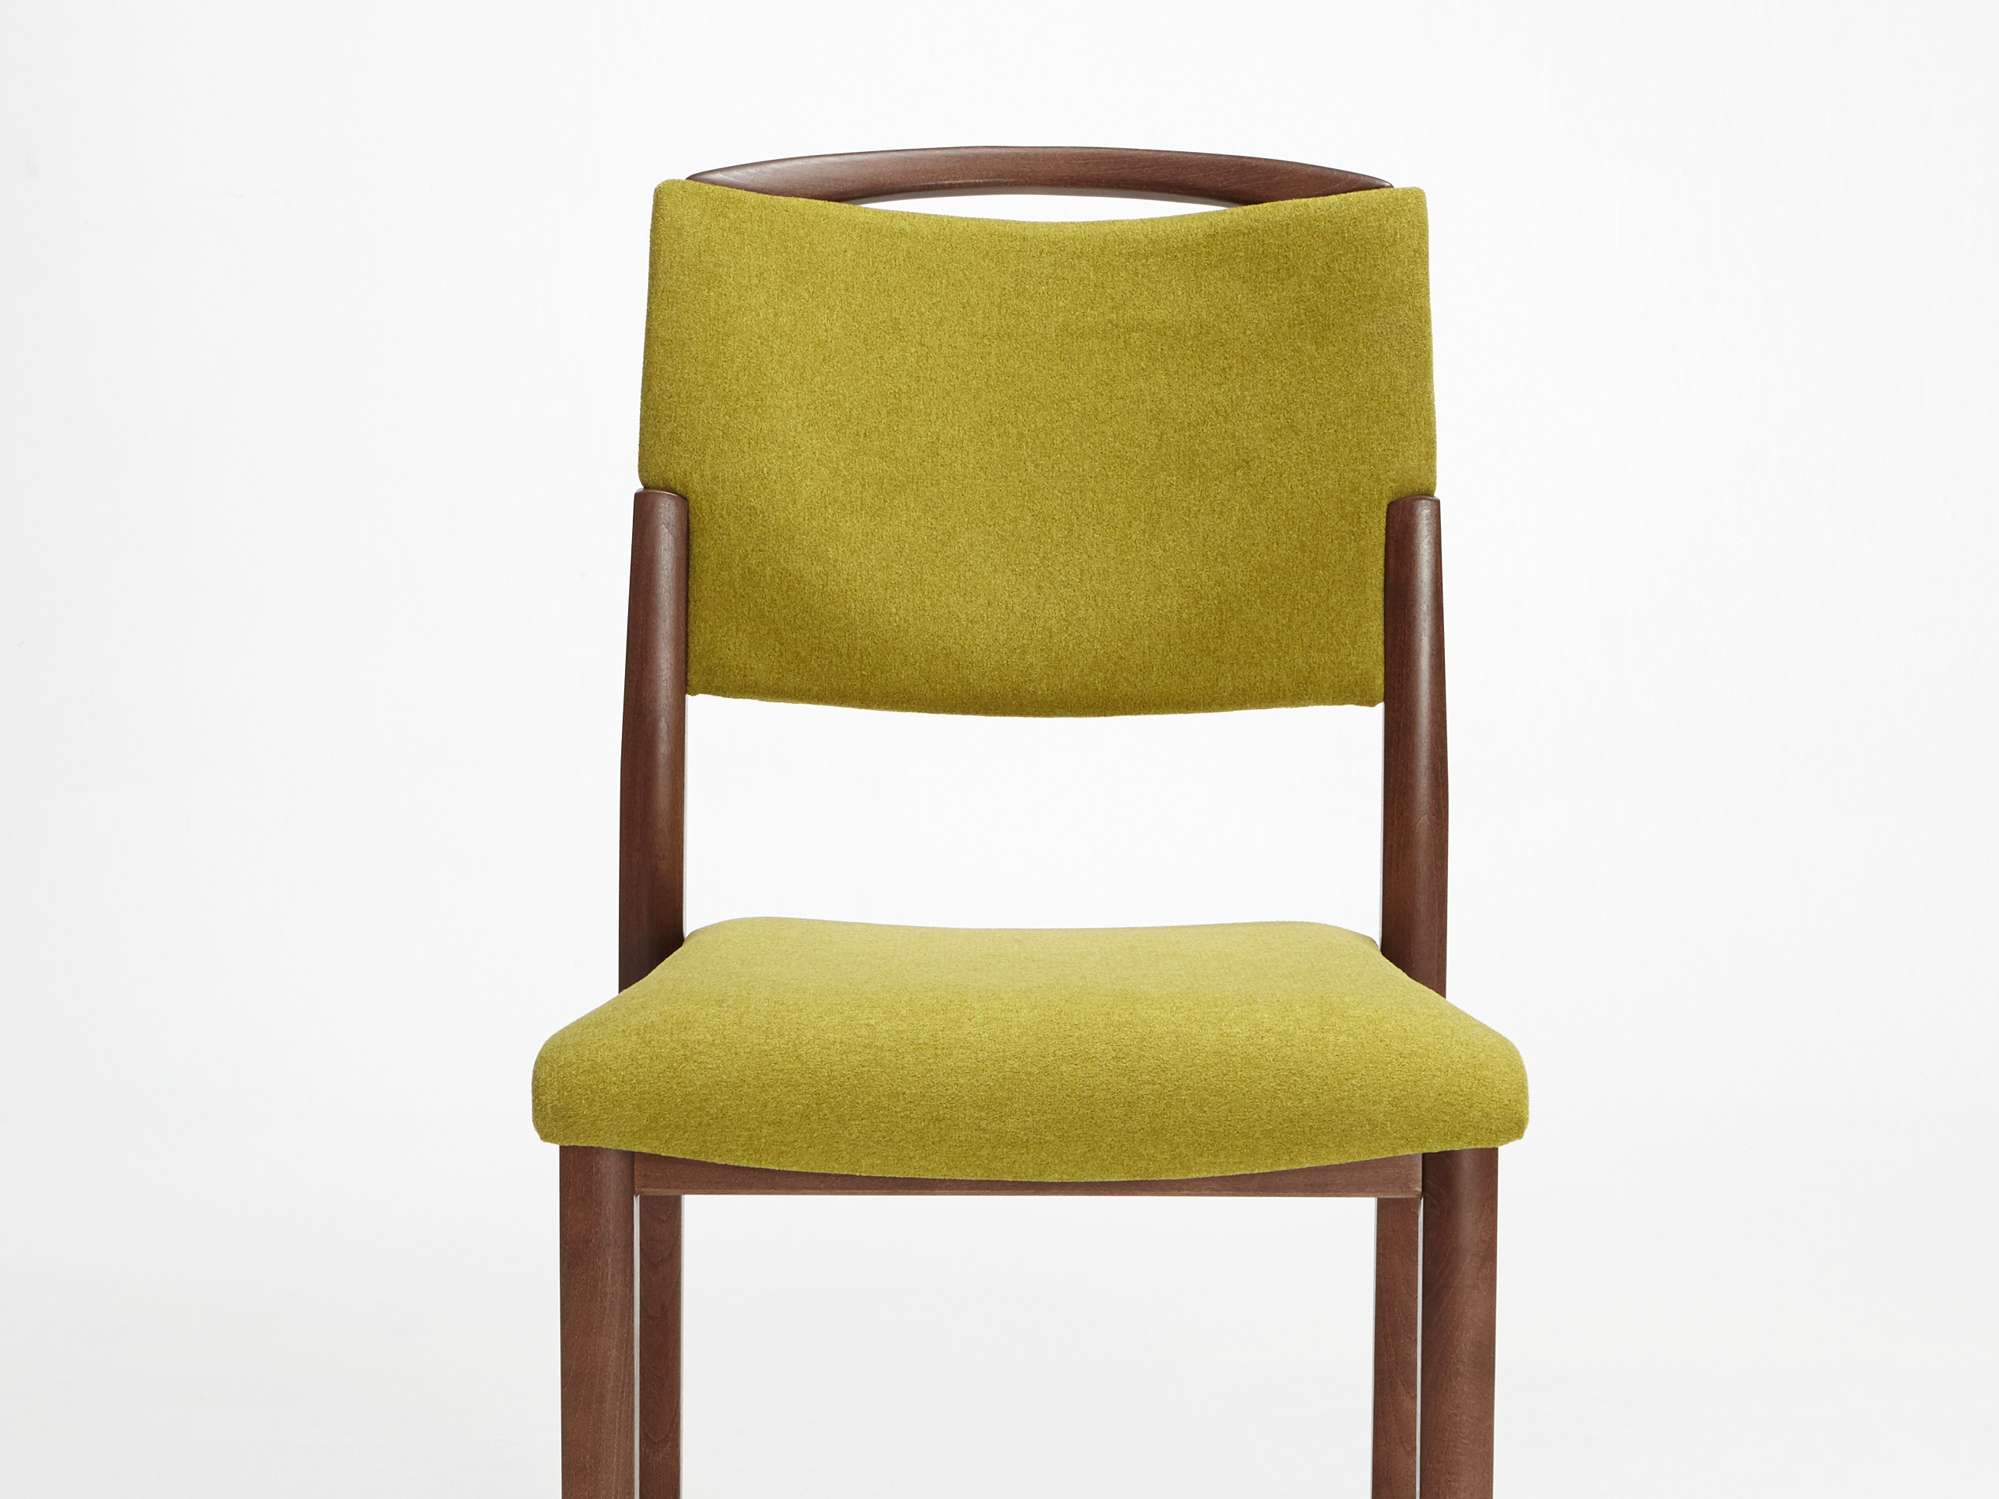 The Fena model as a stacking chair with handle and no armrests